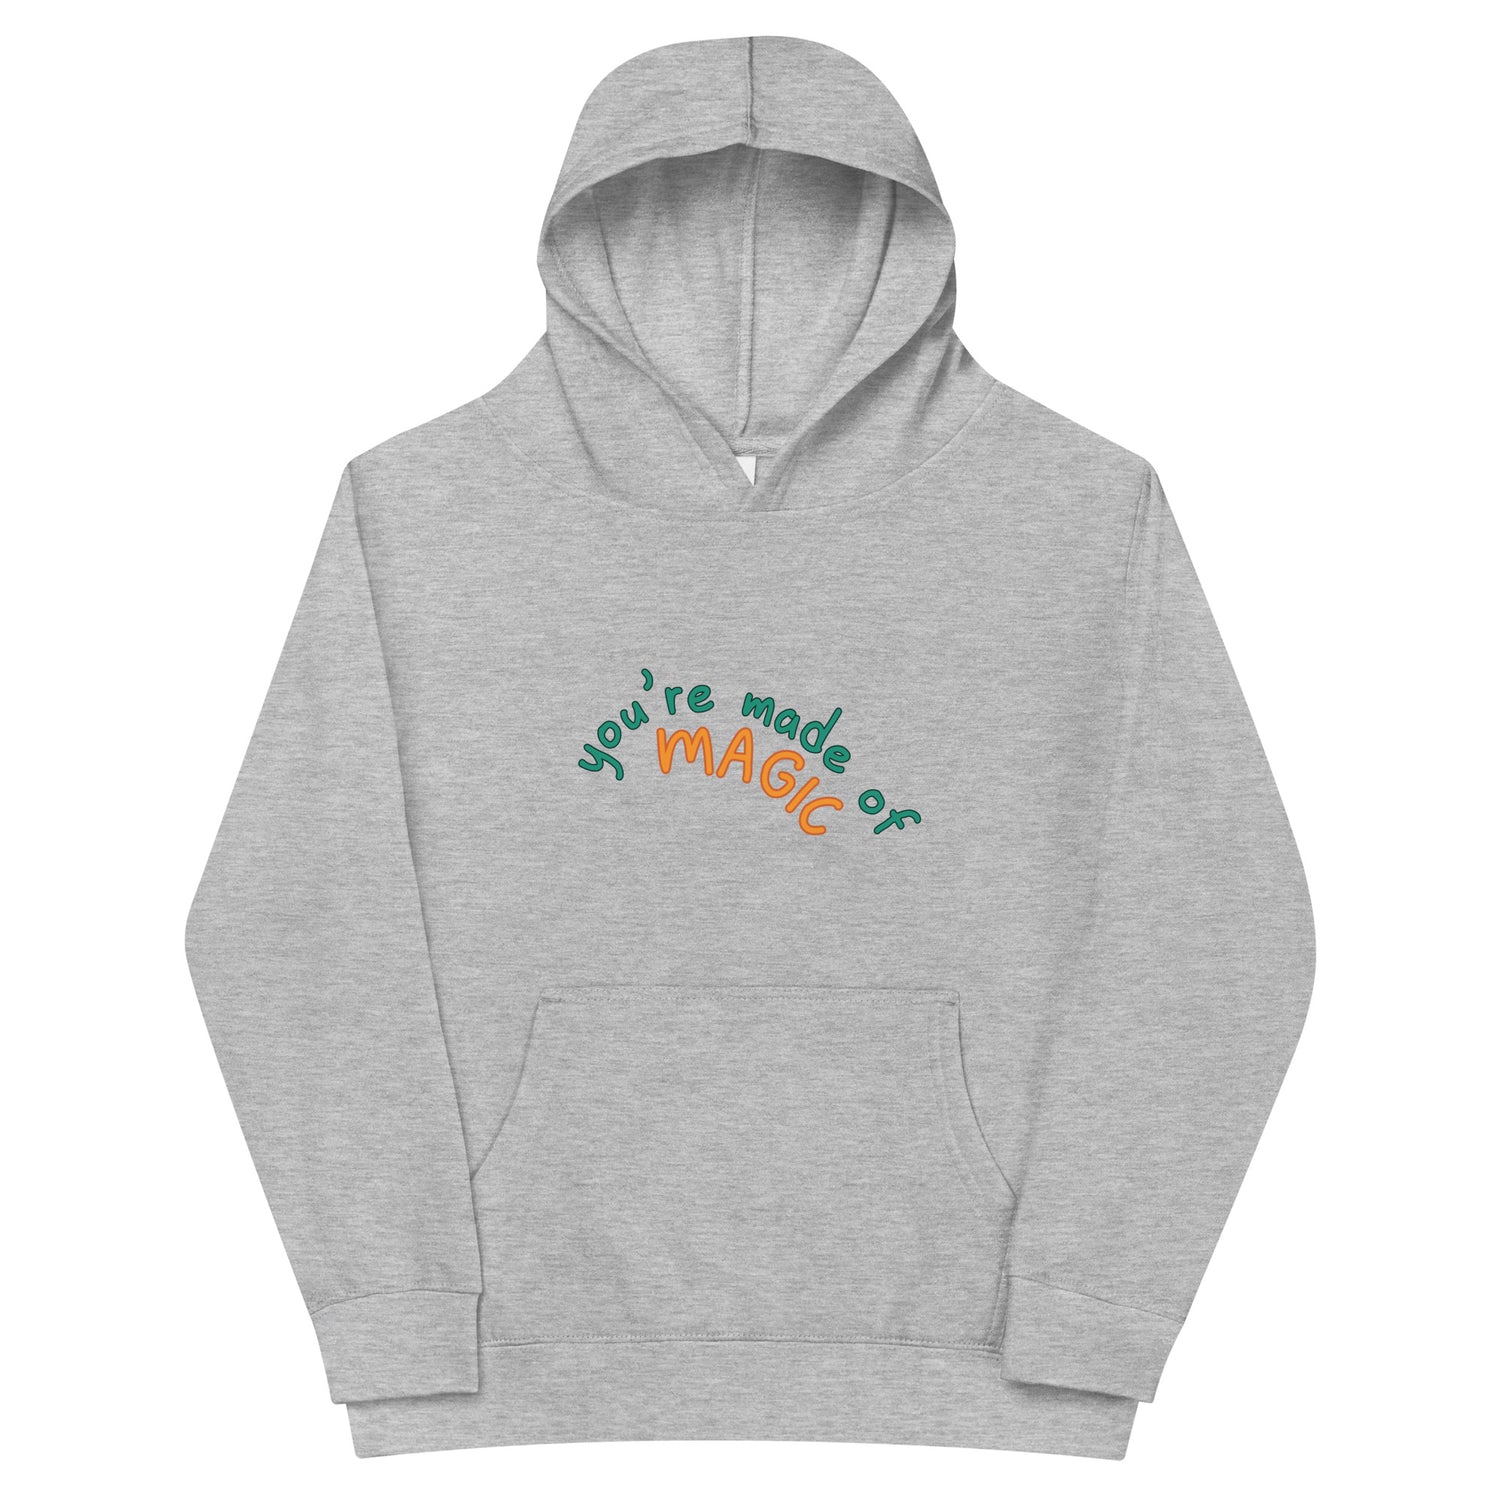 Grey Kidswear hoodie featuring a " you're made of Magic" design with pockets at front.